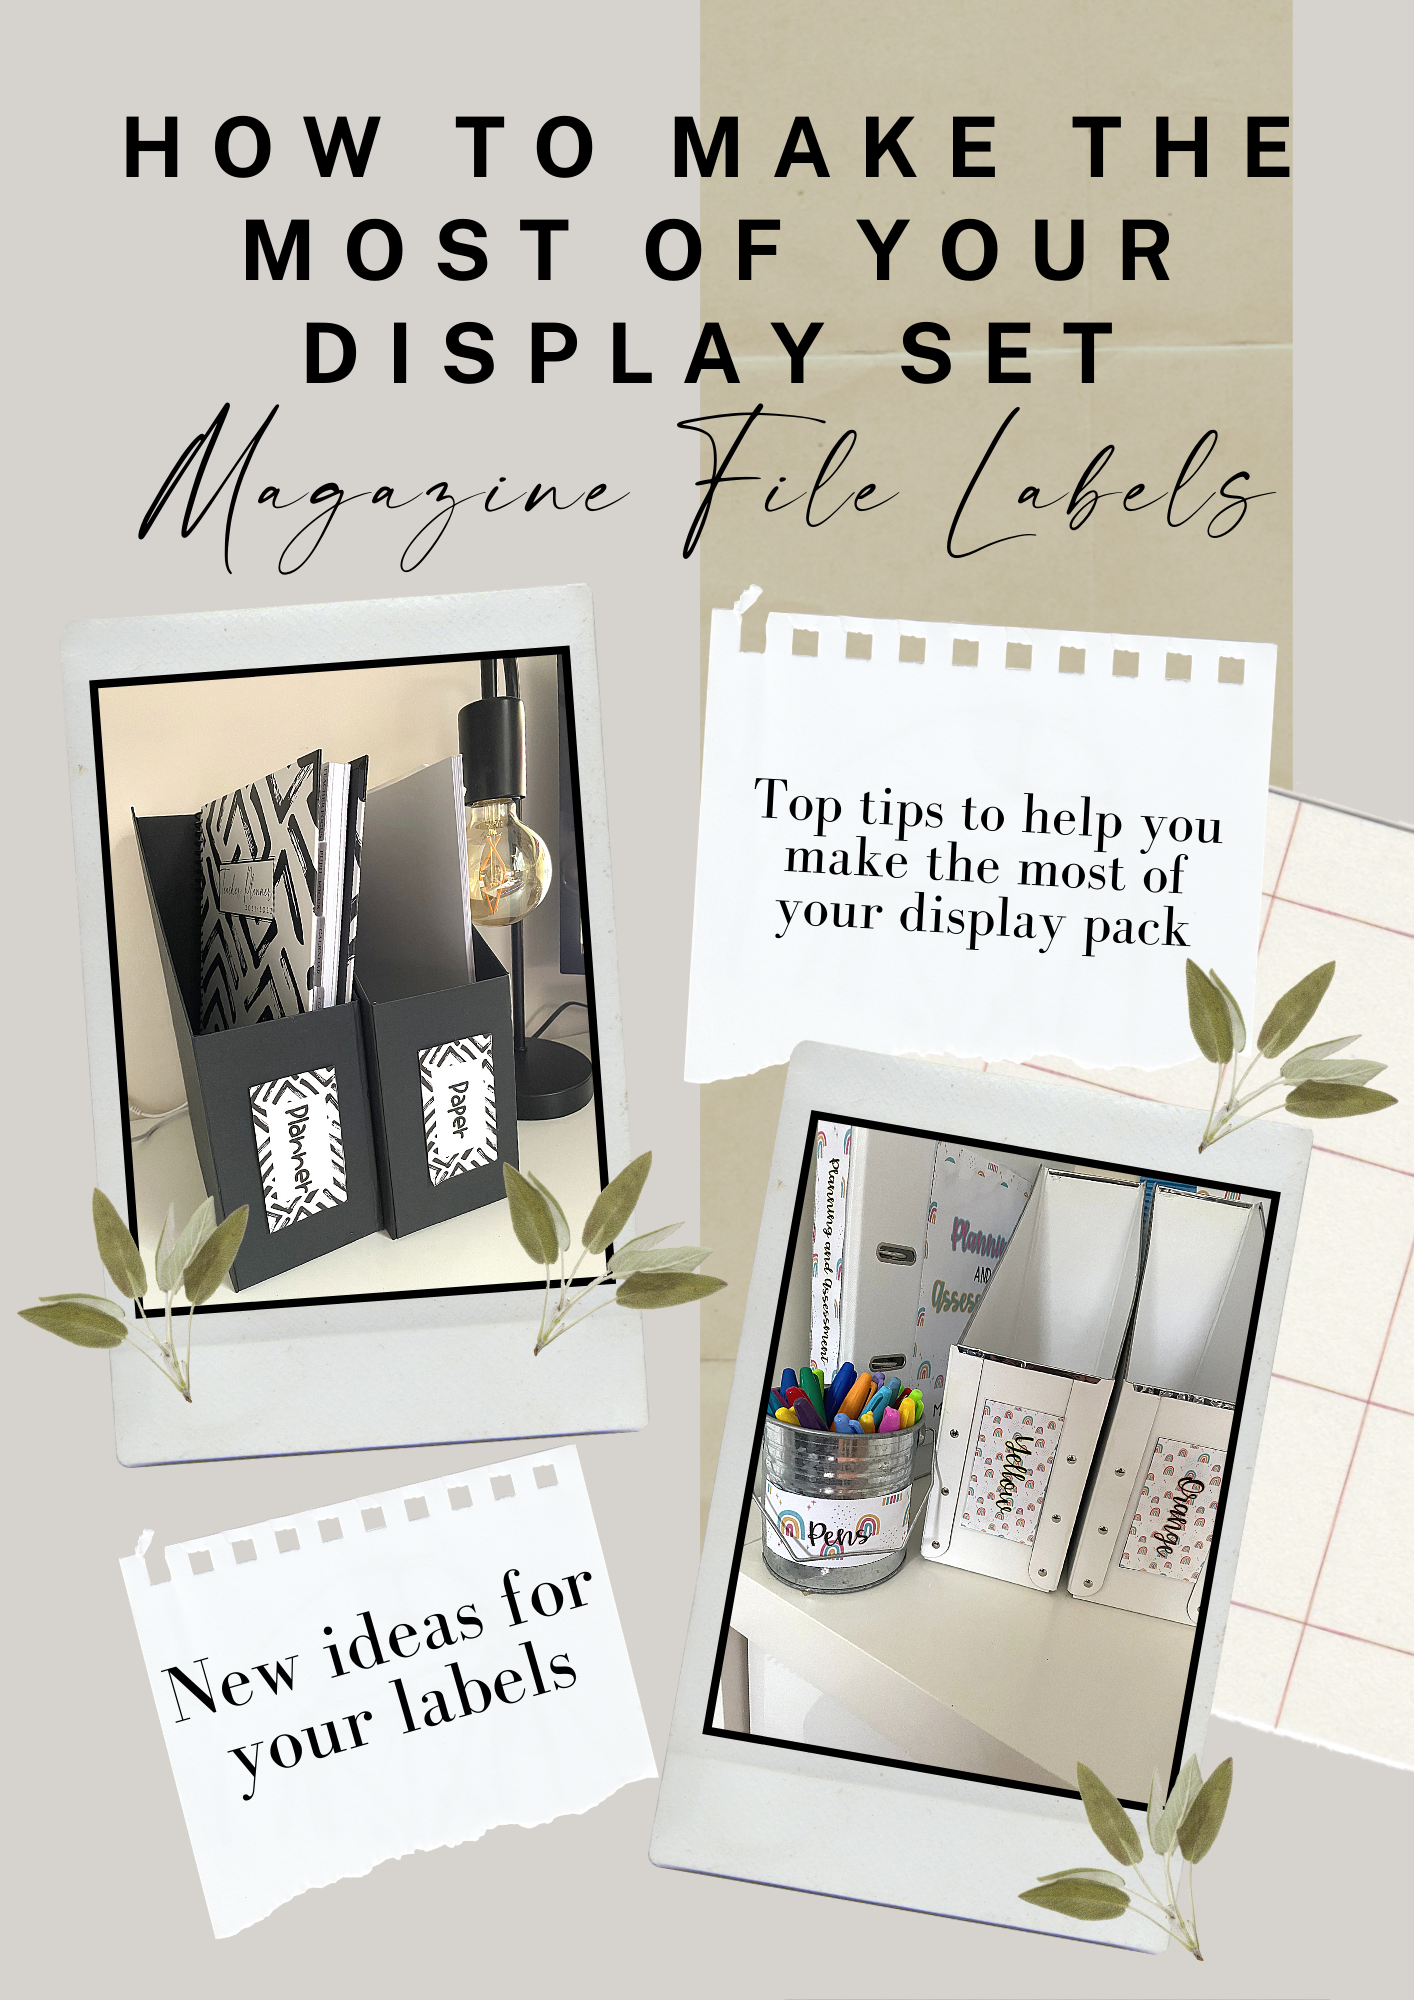 How to make the most of your display set: Magazine File Labels